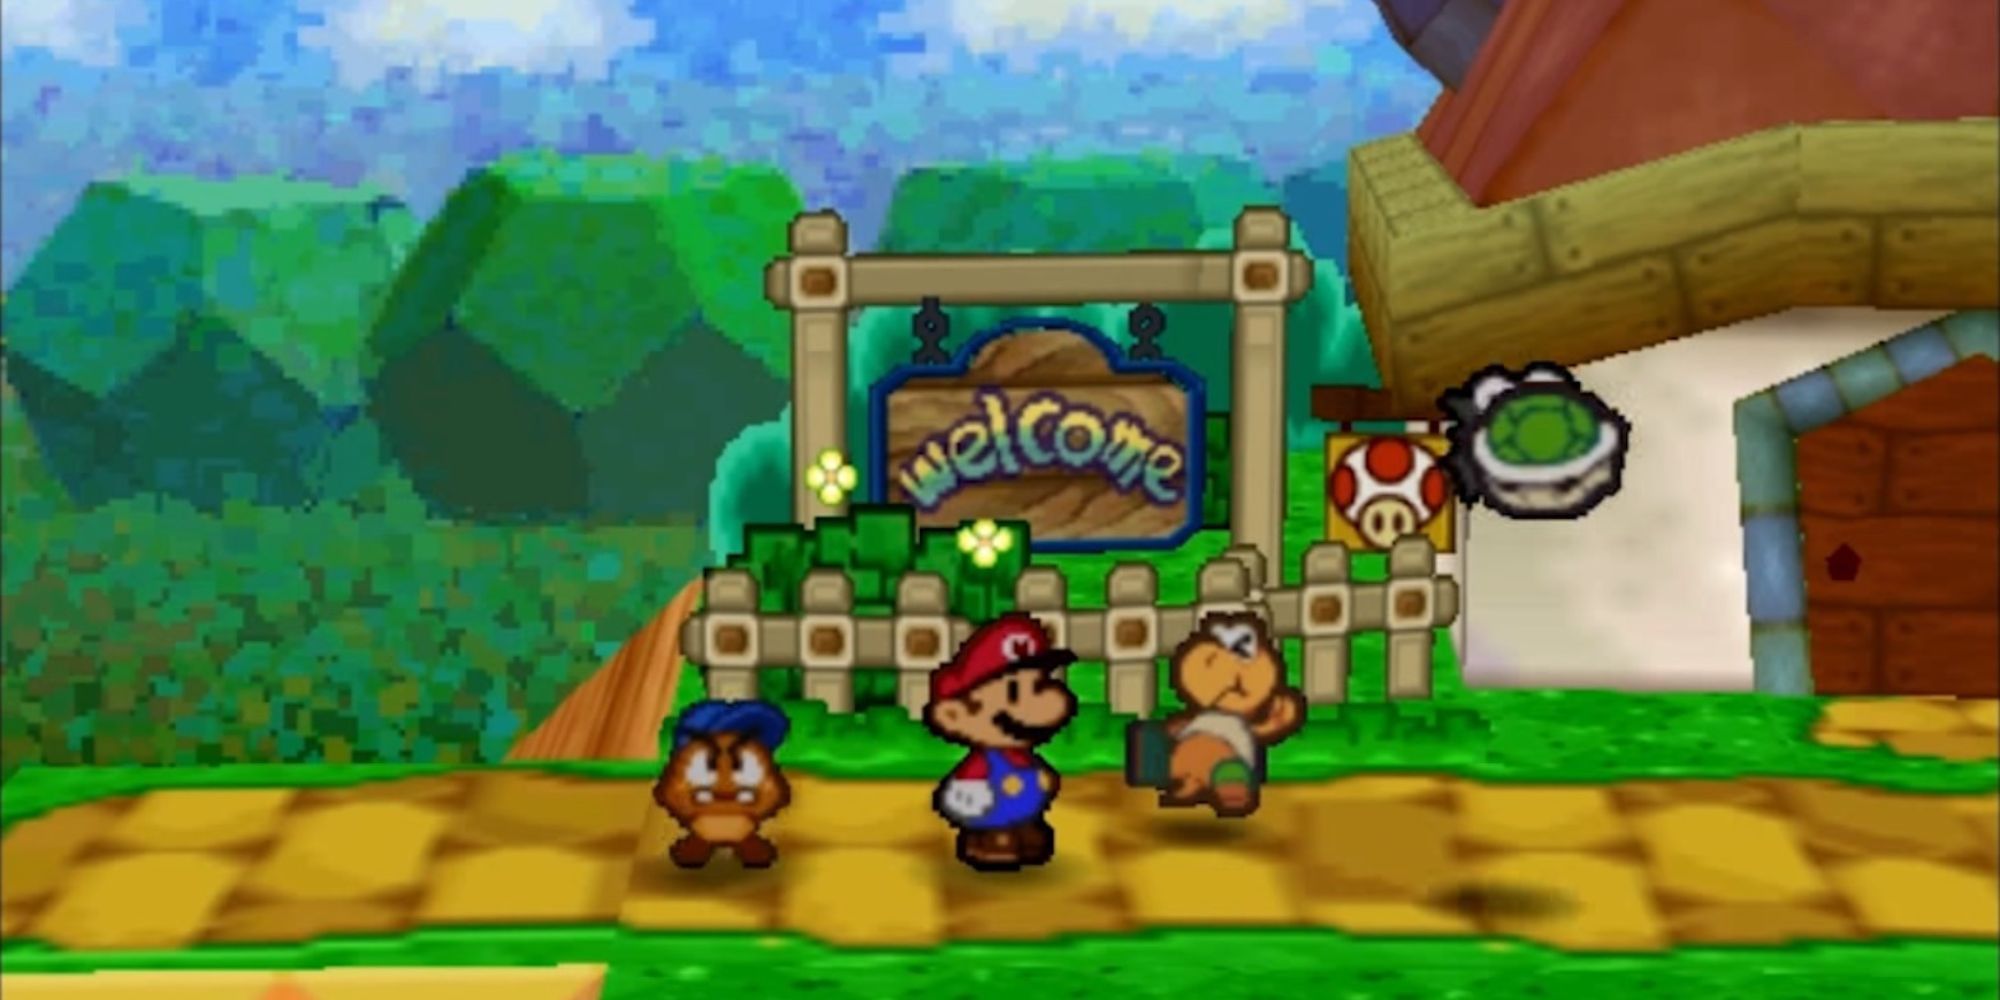 Paper Mario in front of a welcome sign